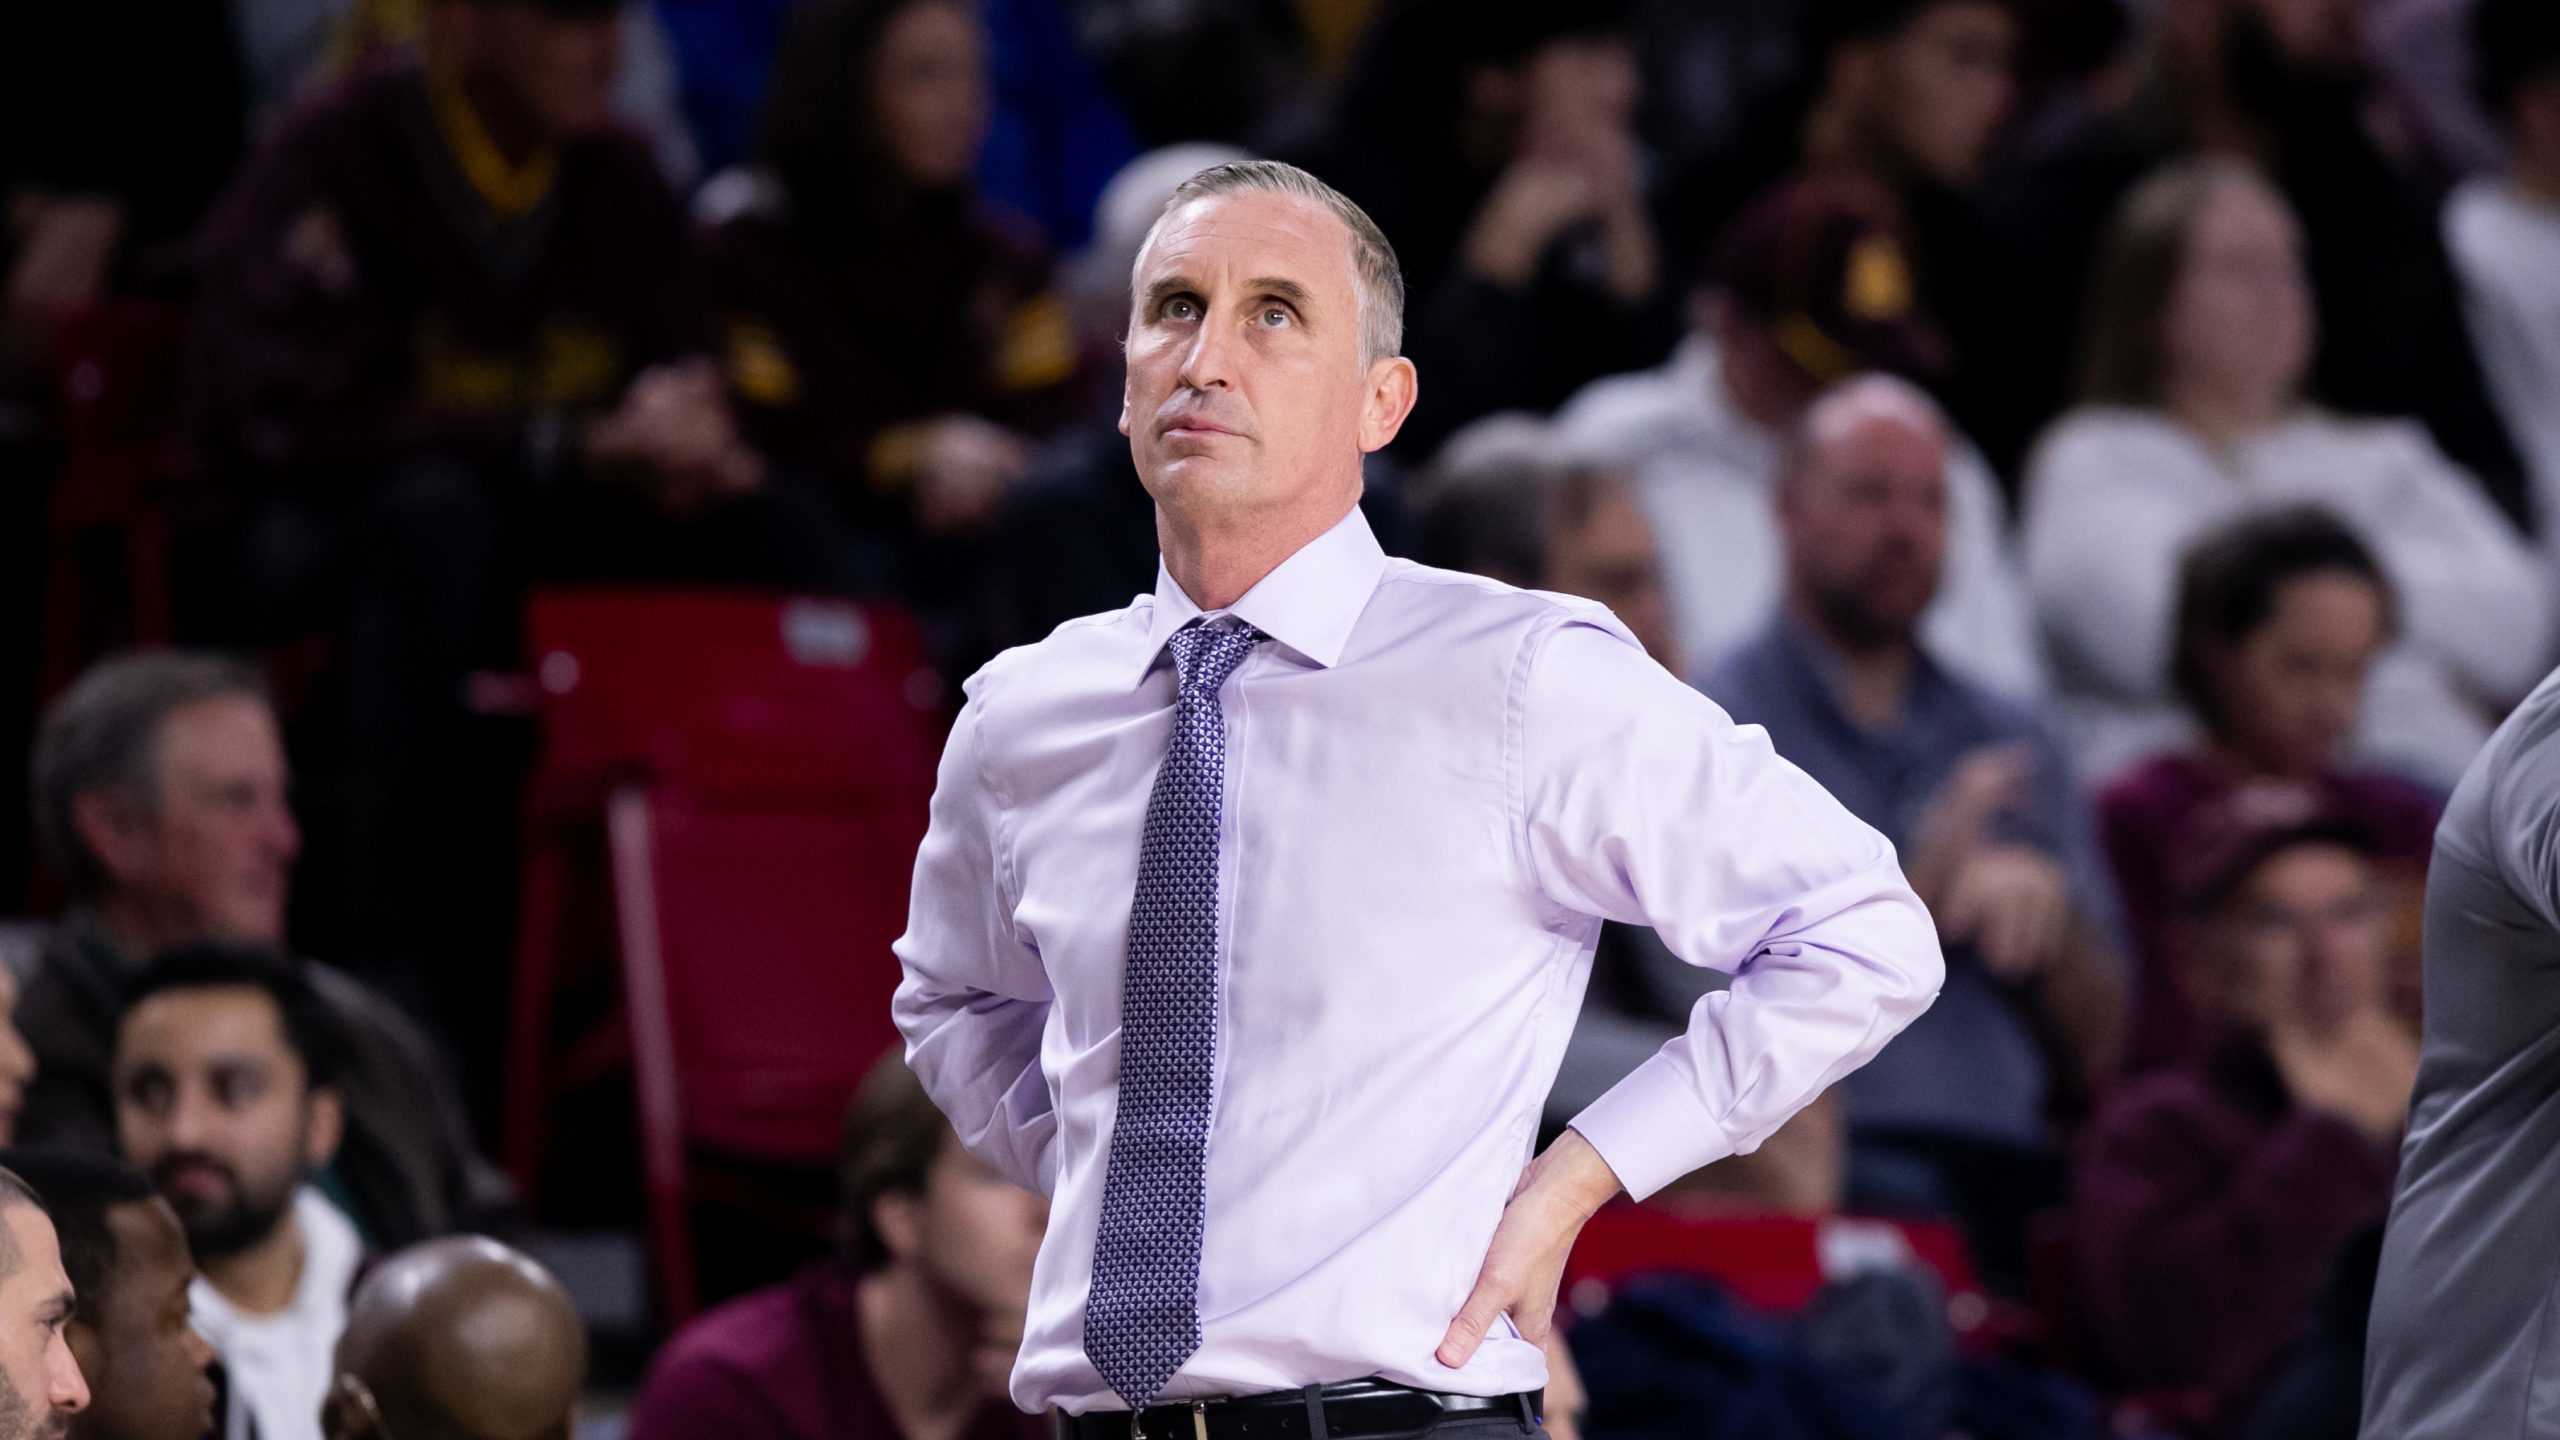 Loss to in-state rival Arizona tough to swallow for Bobby Hurley, ASU